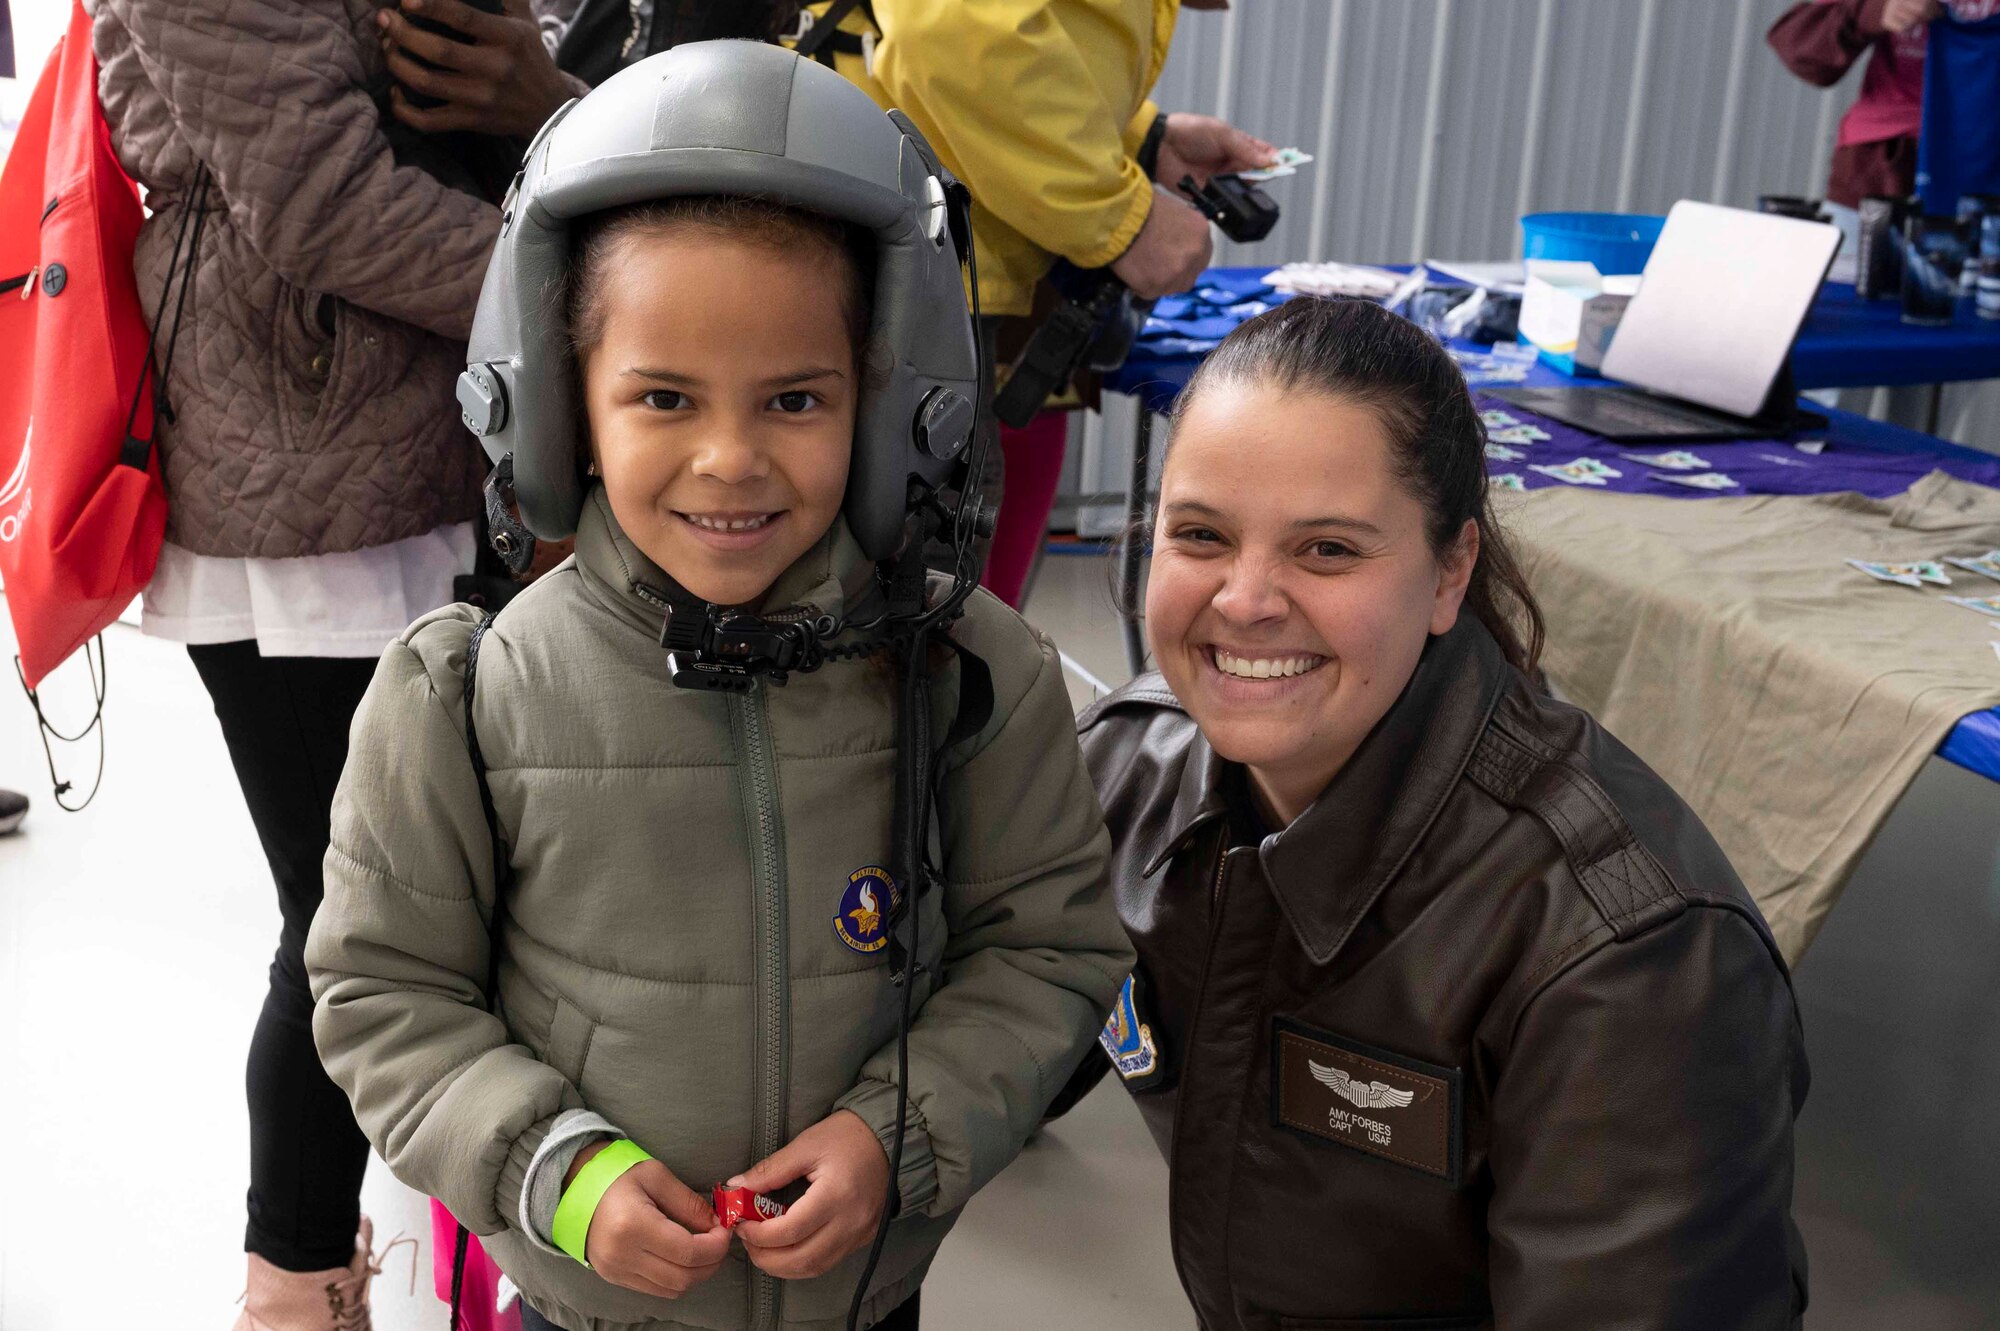 Capt. Amy Forbes, 96th Airlift Squadron pilot, poses with a young girl at the 7th annual Girls in Aviation Day hosted by the Women in Aviation International at the Flying Cloud Airport in Eden Prairie, Minn., on Sept. 25, 2021. After the 2020 event was cancelled due to the COVID-19 pandemic, participating in this year’s event was something the wing’s Reserve Citizen Airmen looked forward to.